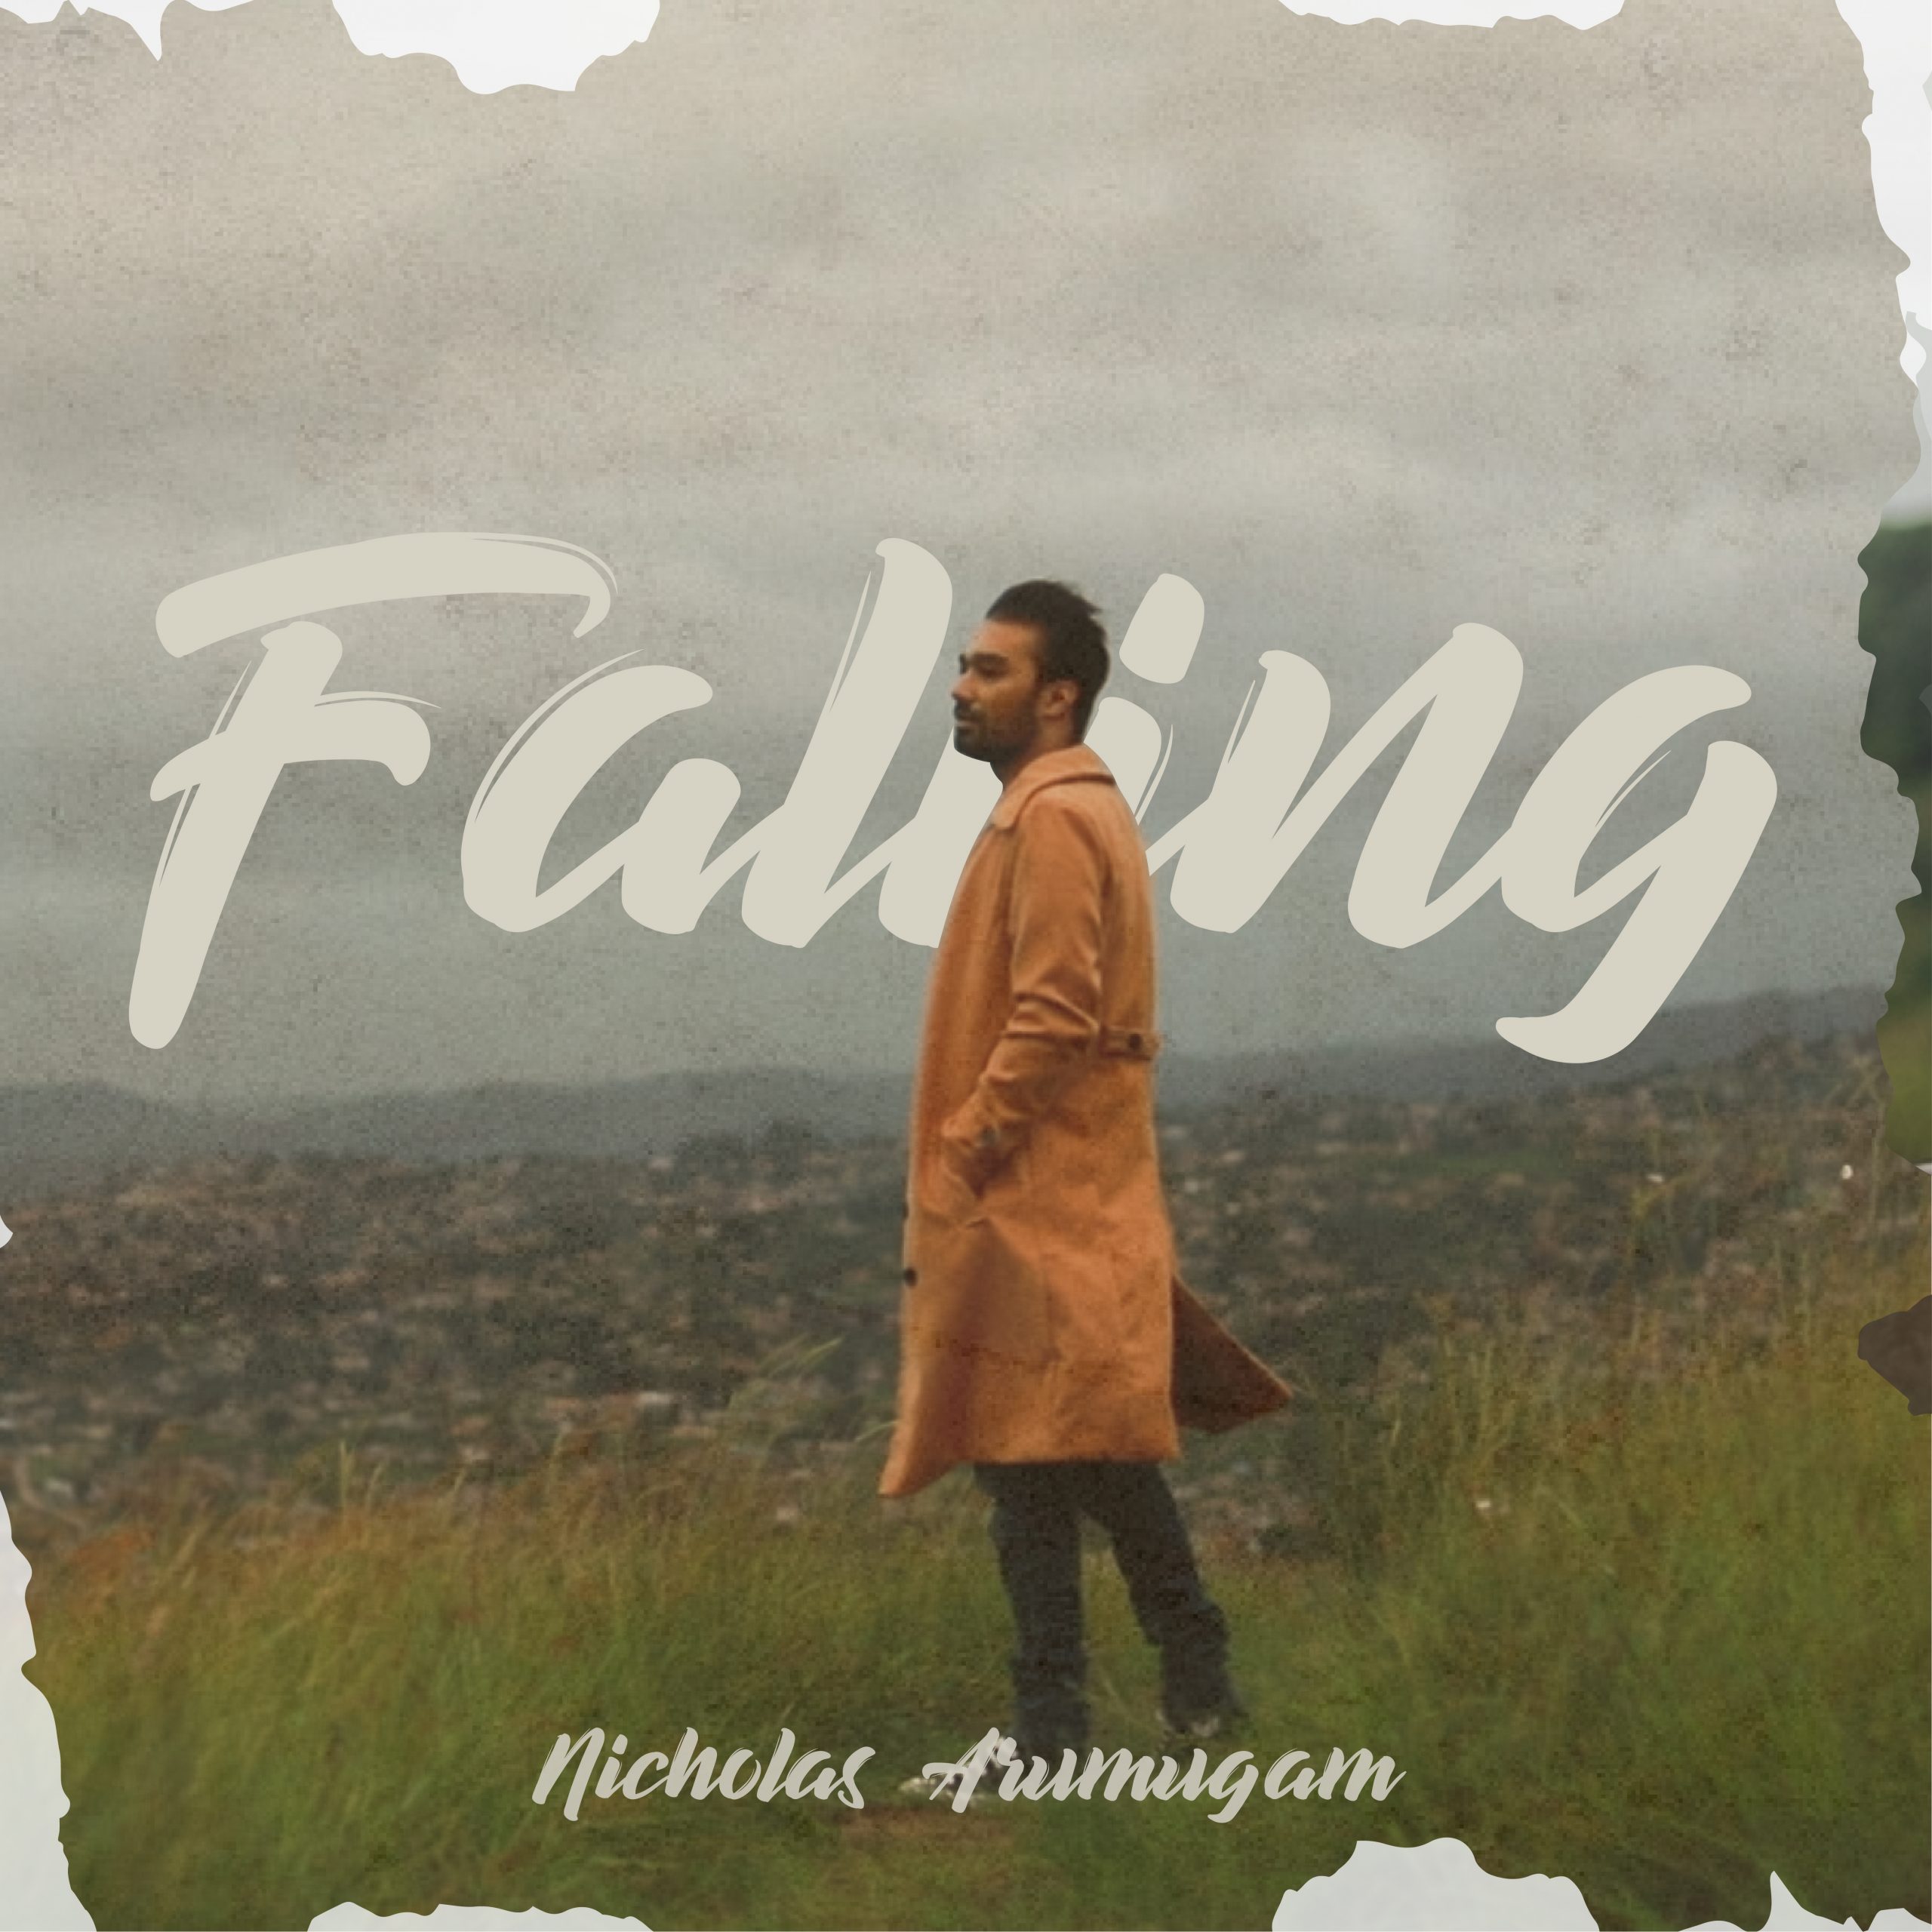 Durban Singer Songwriter Nicholas Arumugam Releases Powerful Cover of Harry Styles Falling. Now added to Bafana FM. Watch the music Video